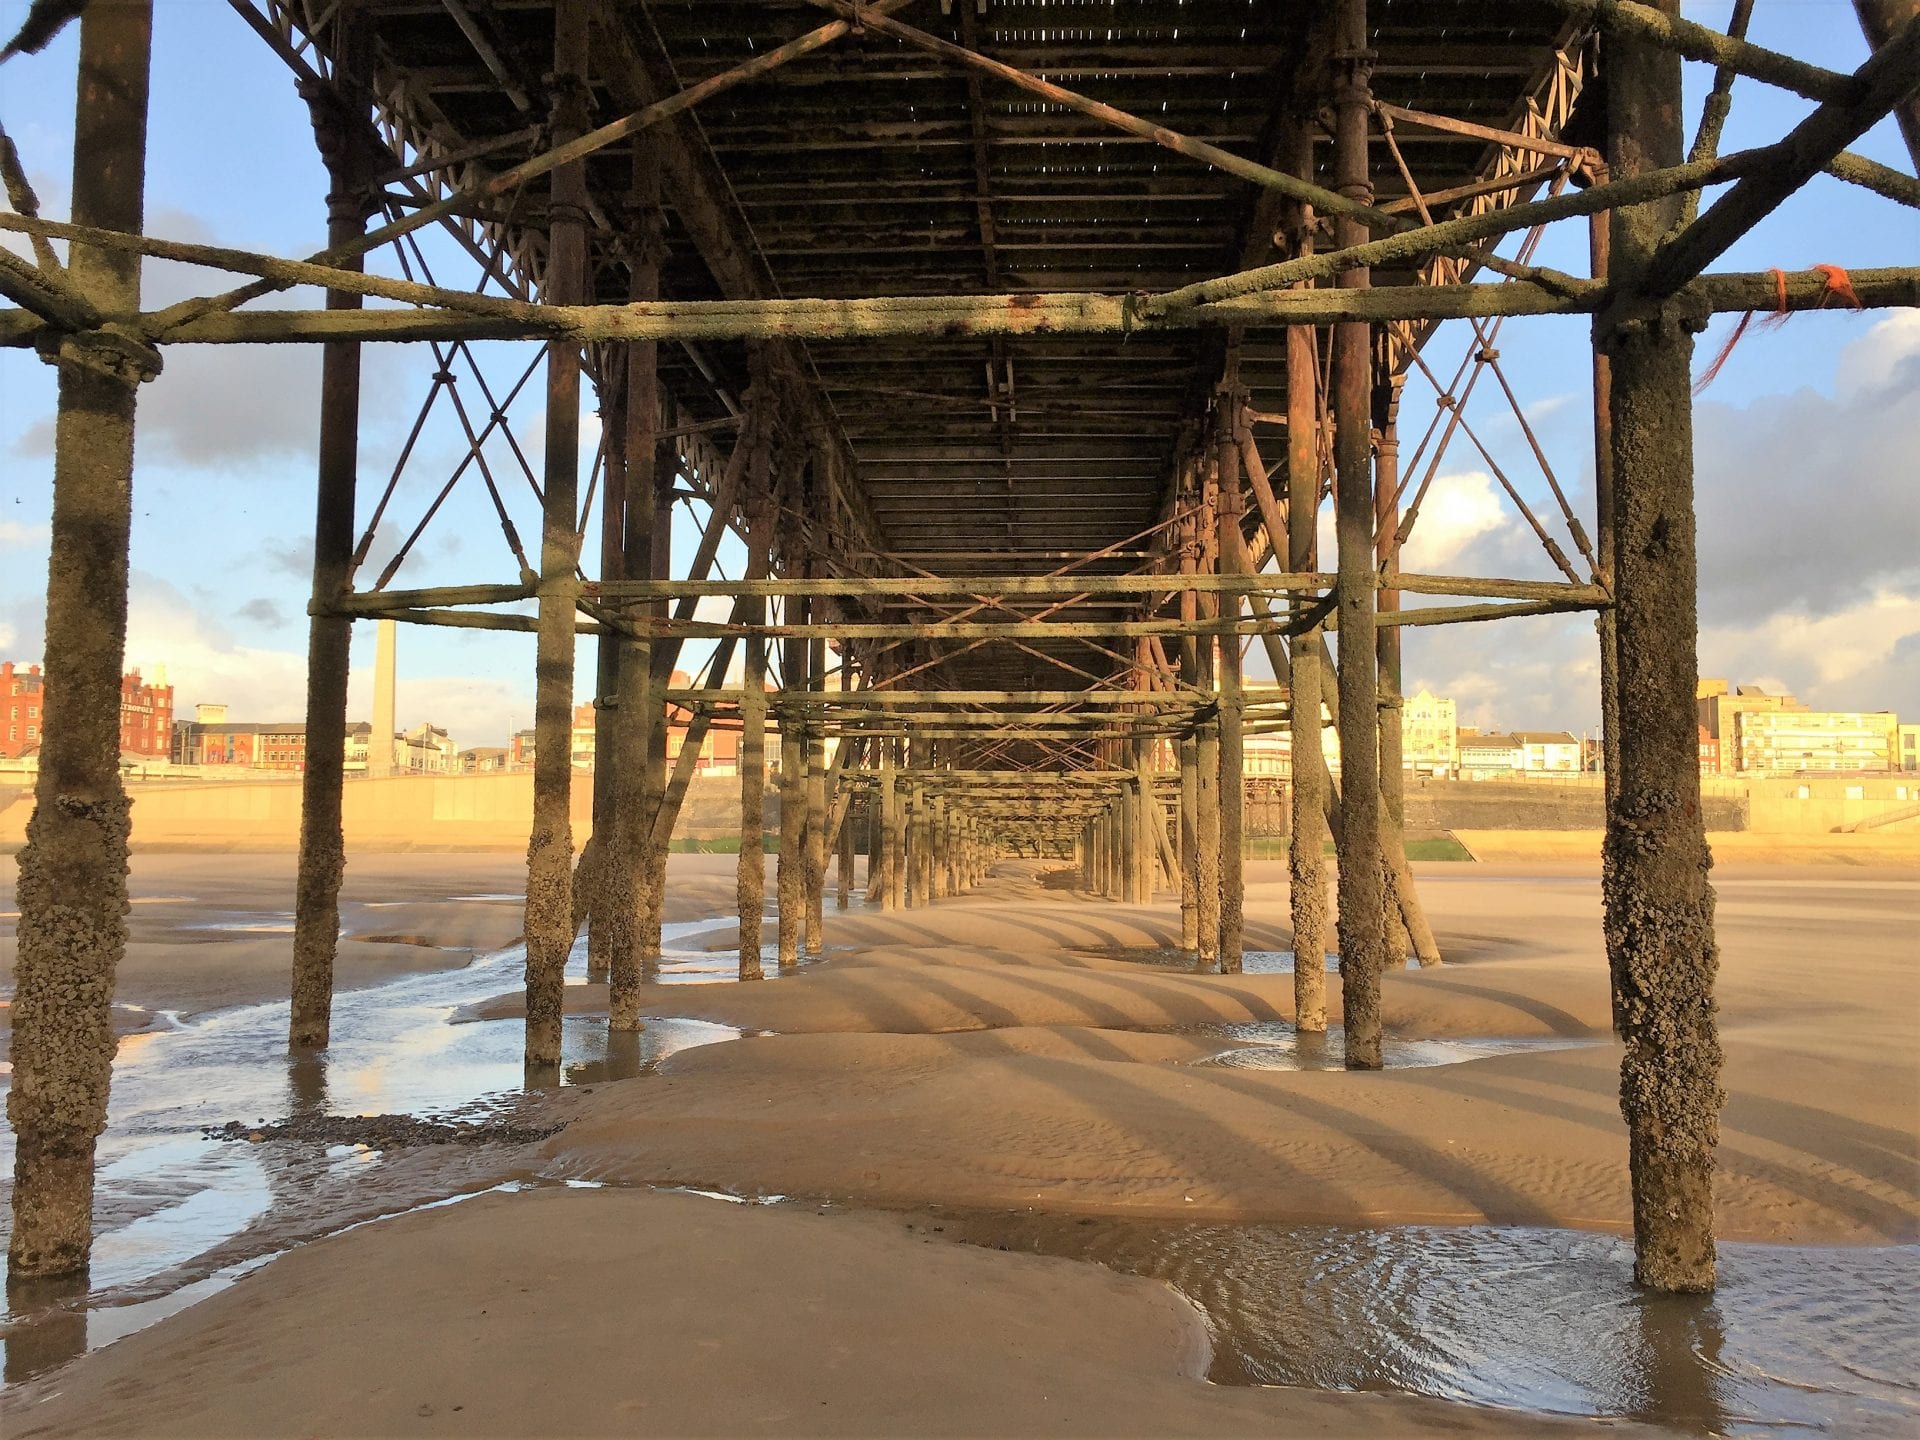 Under Blackpool Pier, by Cameron McDade